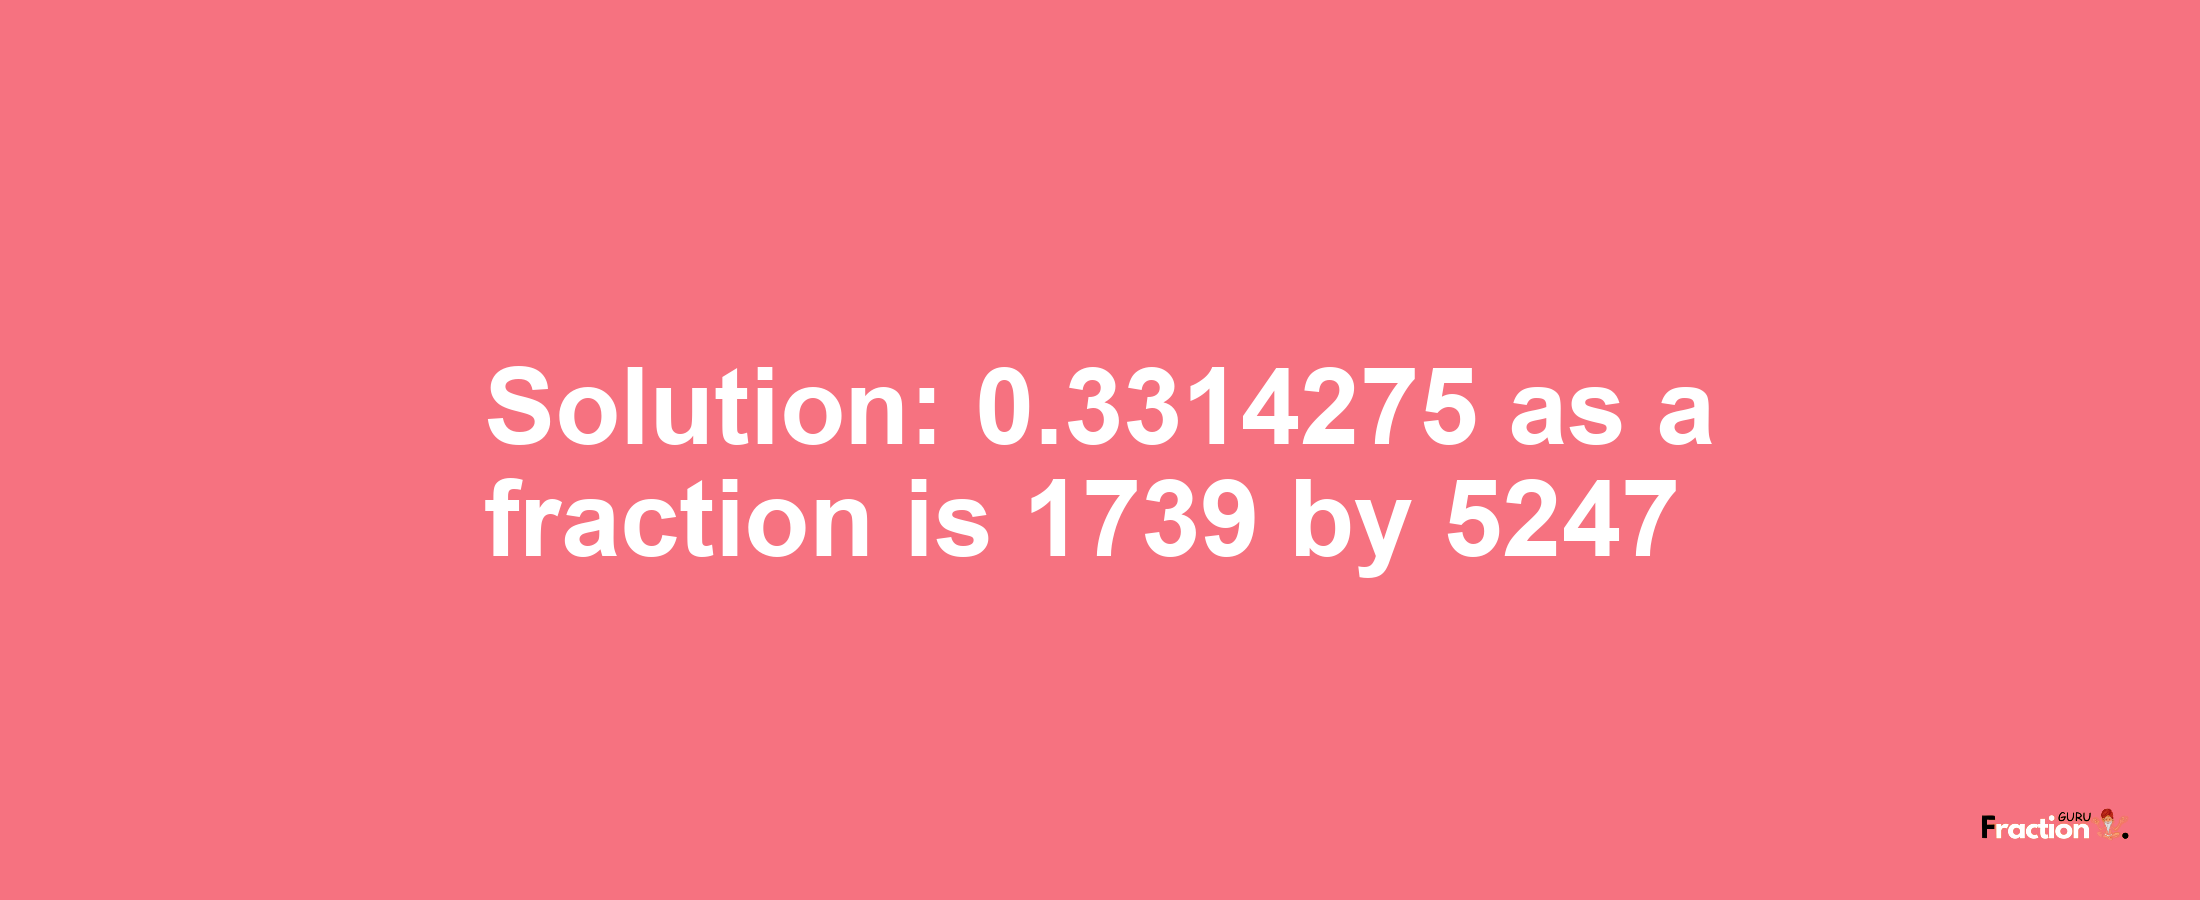 Solution:0.3314275 as a fraction is 1739/5247